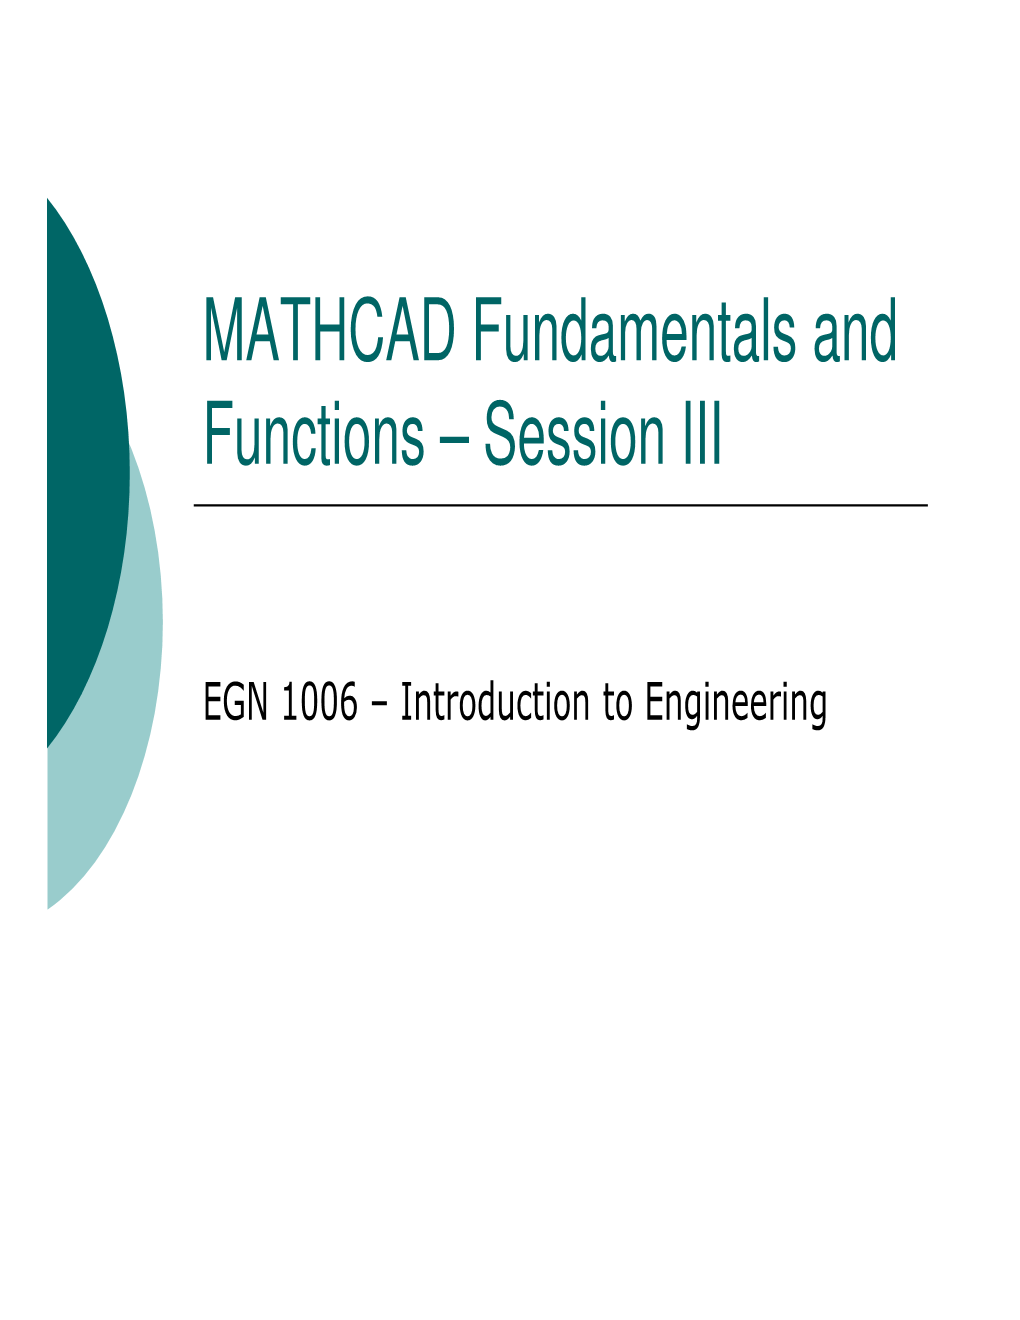 MATHCAD Fundamentals and Functions – Session III